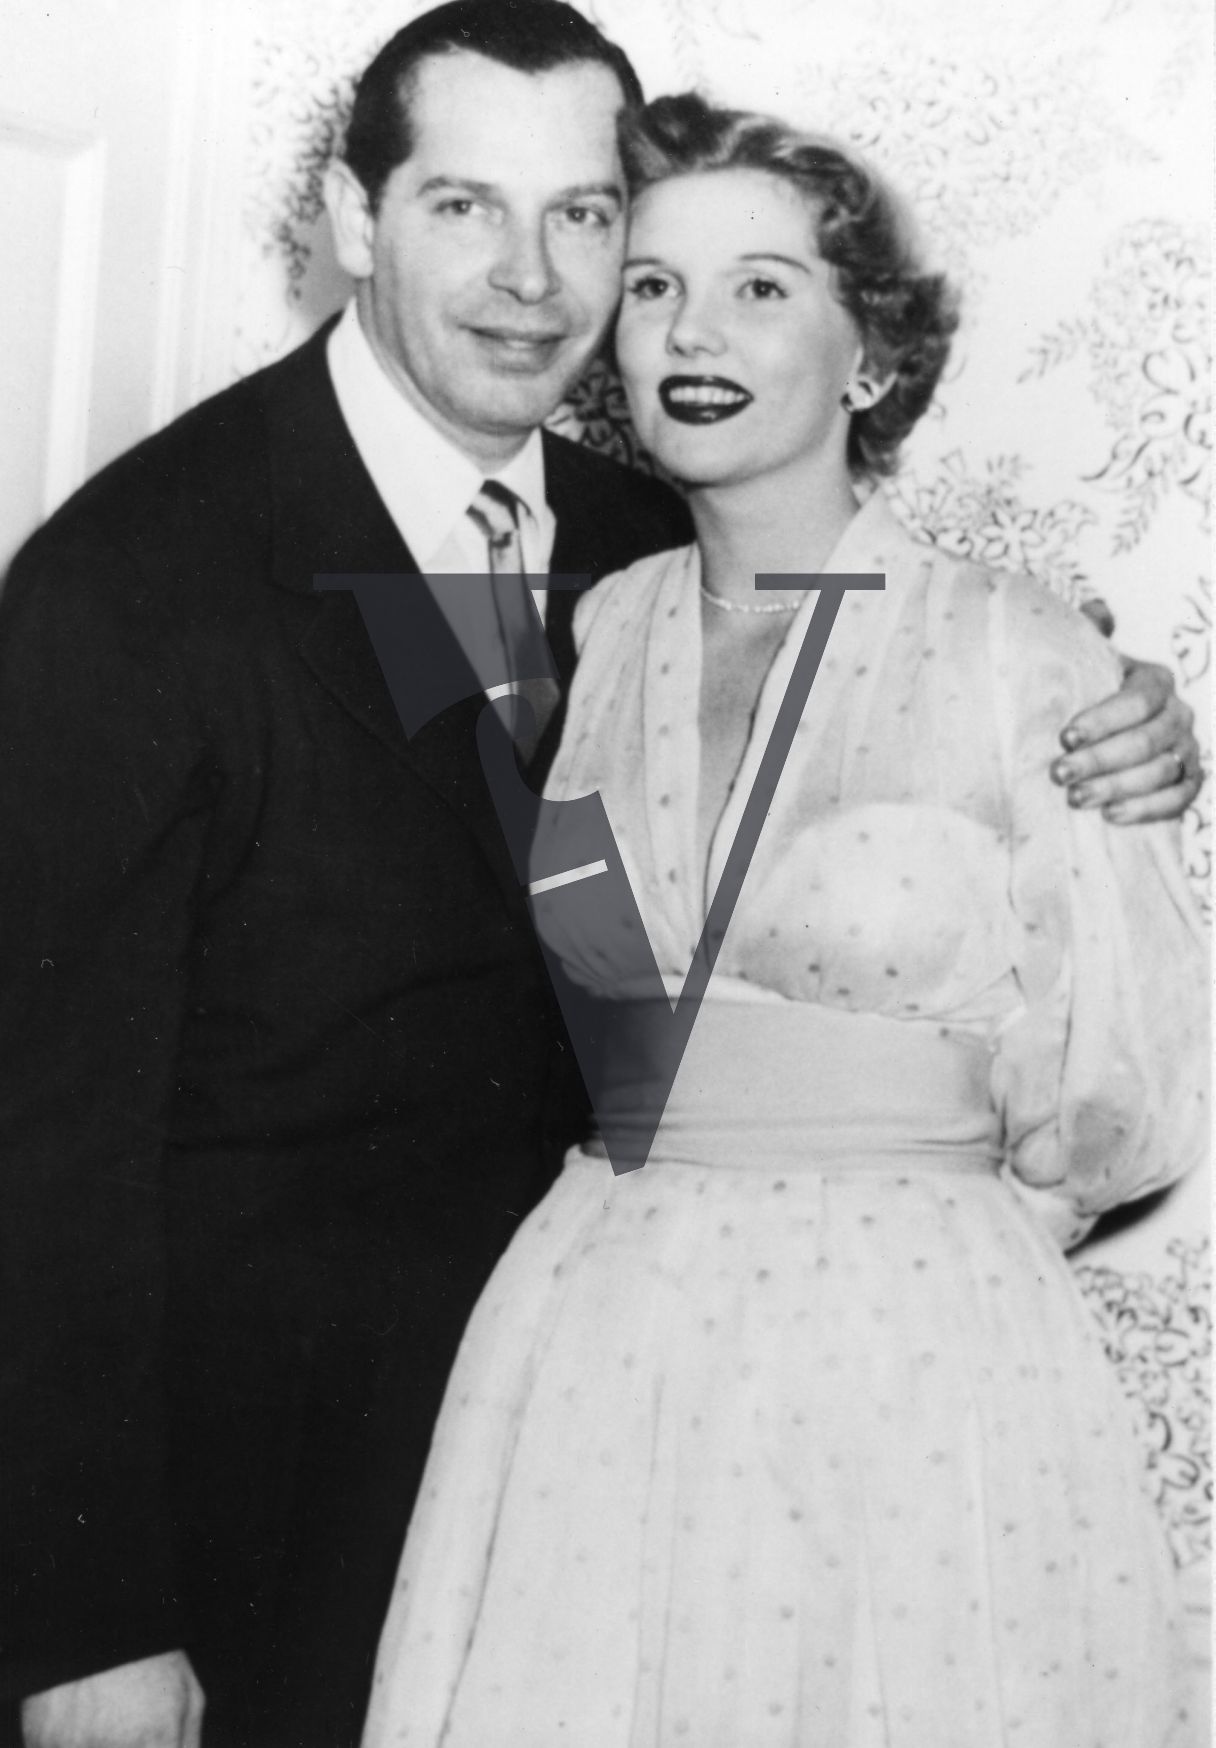 Milton Berle with woman, actor, comedian, Golden Age of Television, portrait, mid-shot.